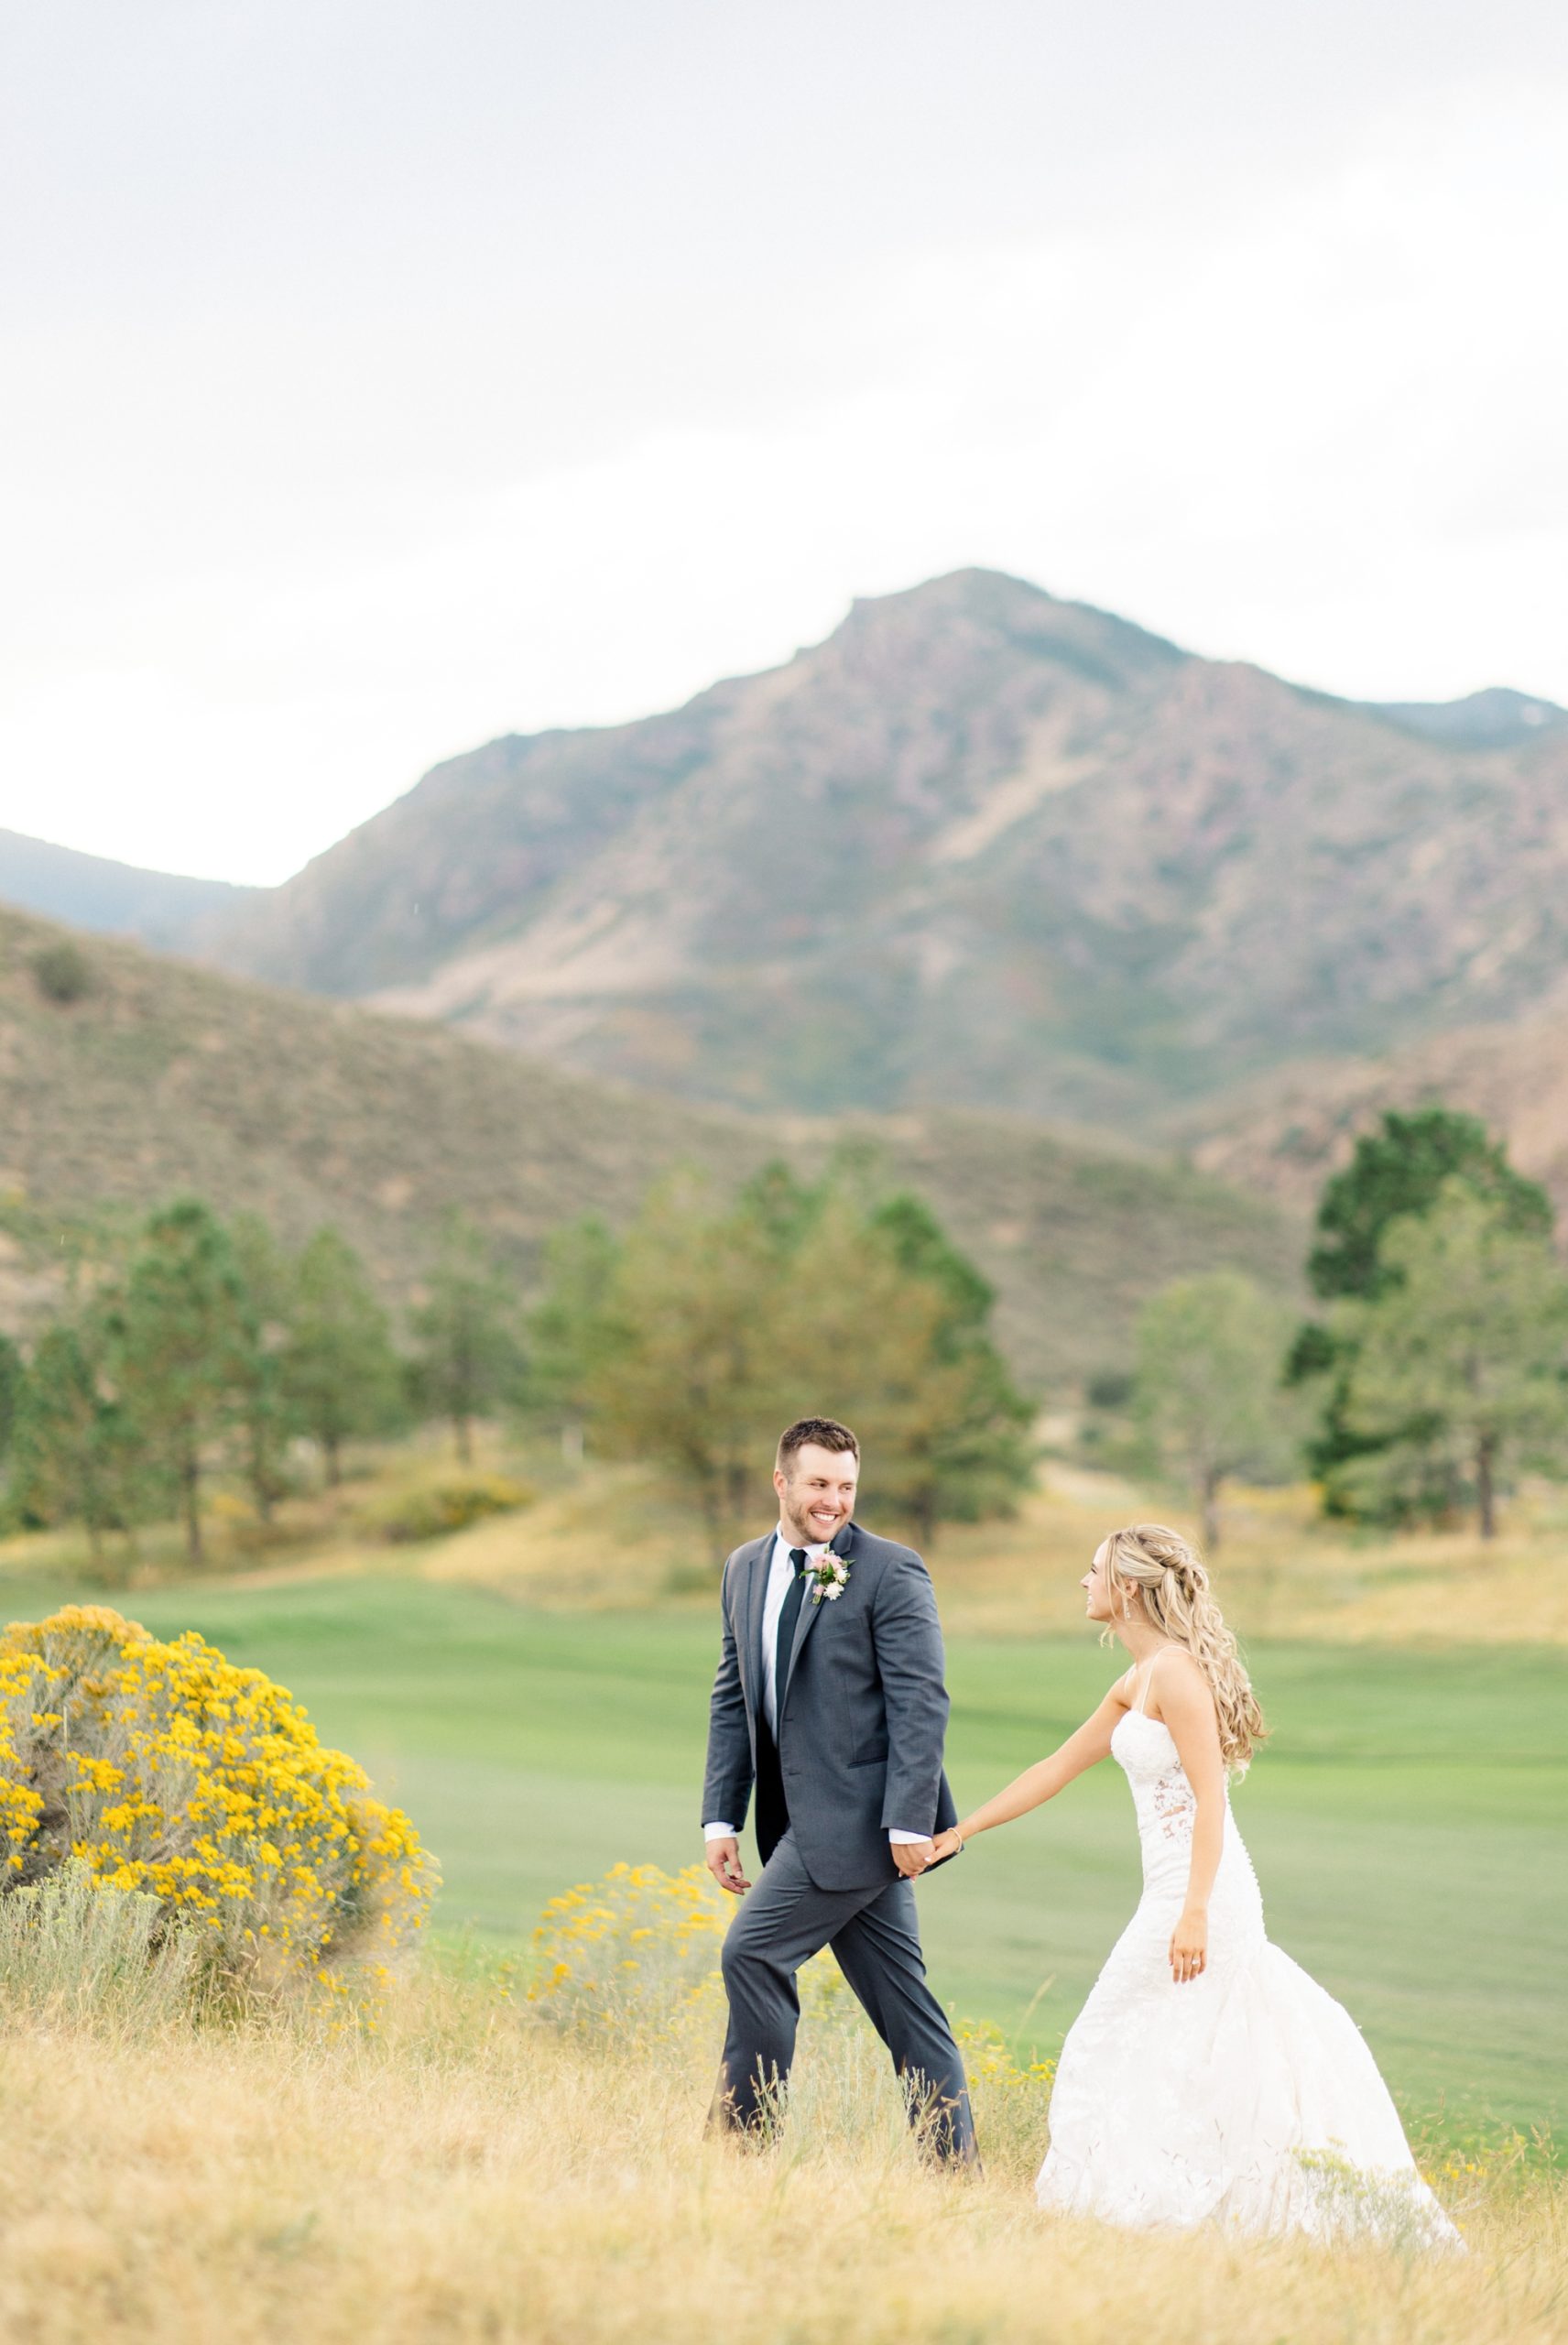 Bride and groom walking at Ravenna Golf club wedding with Mountain View behind them